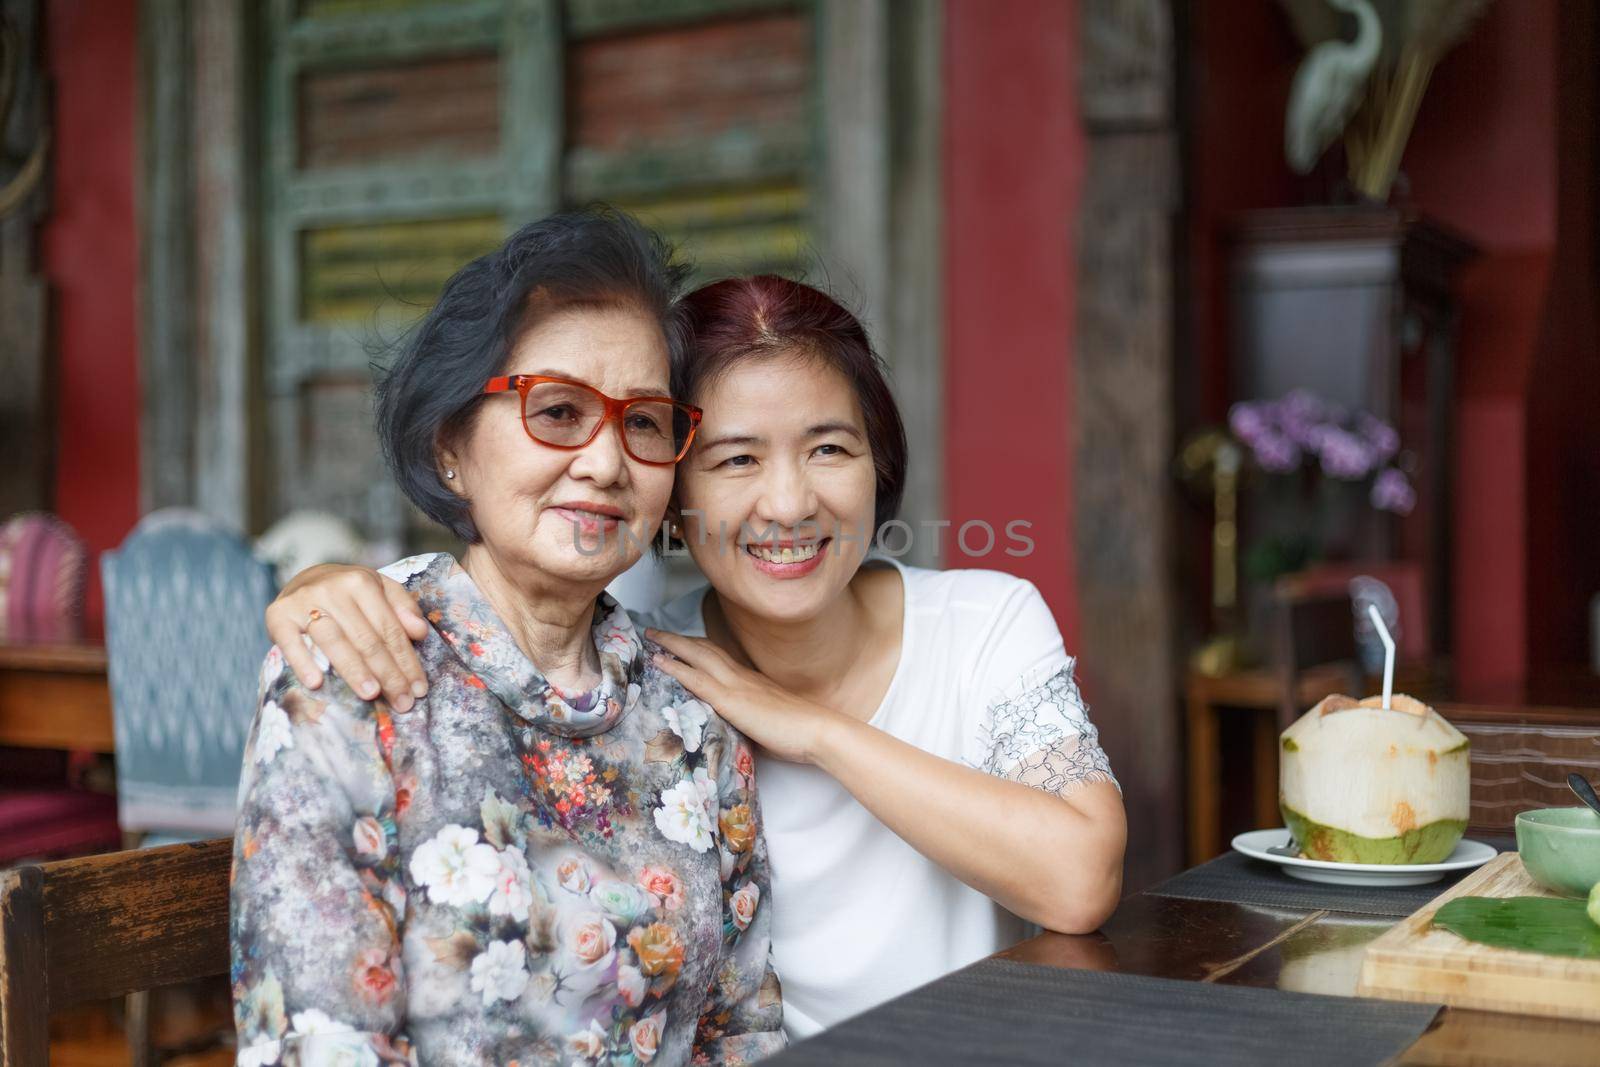 Senior asian woman with daughter relaxing on vacation together in mothers day.